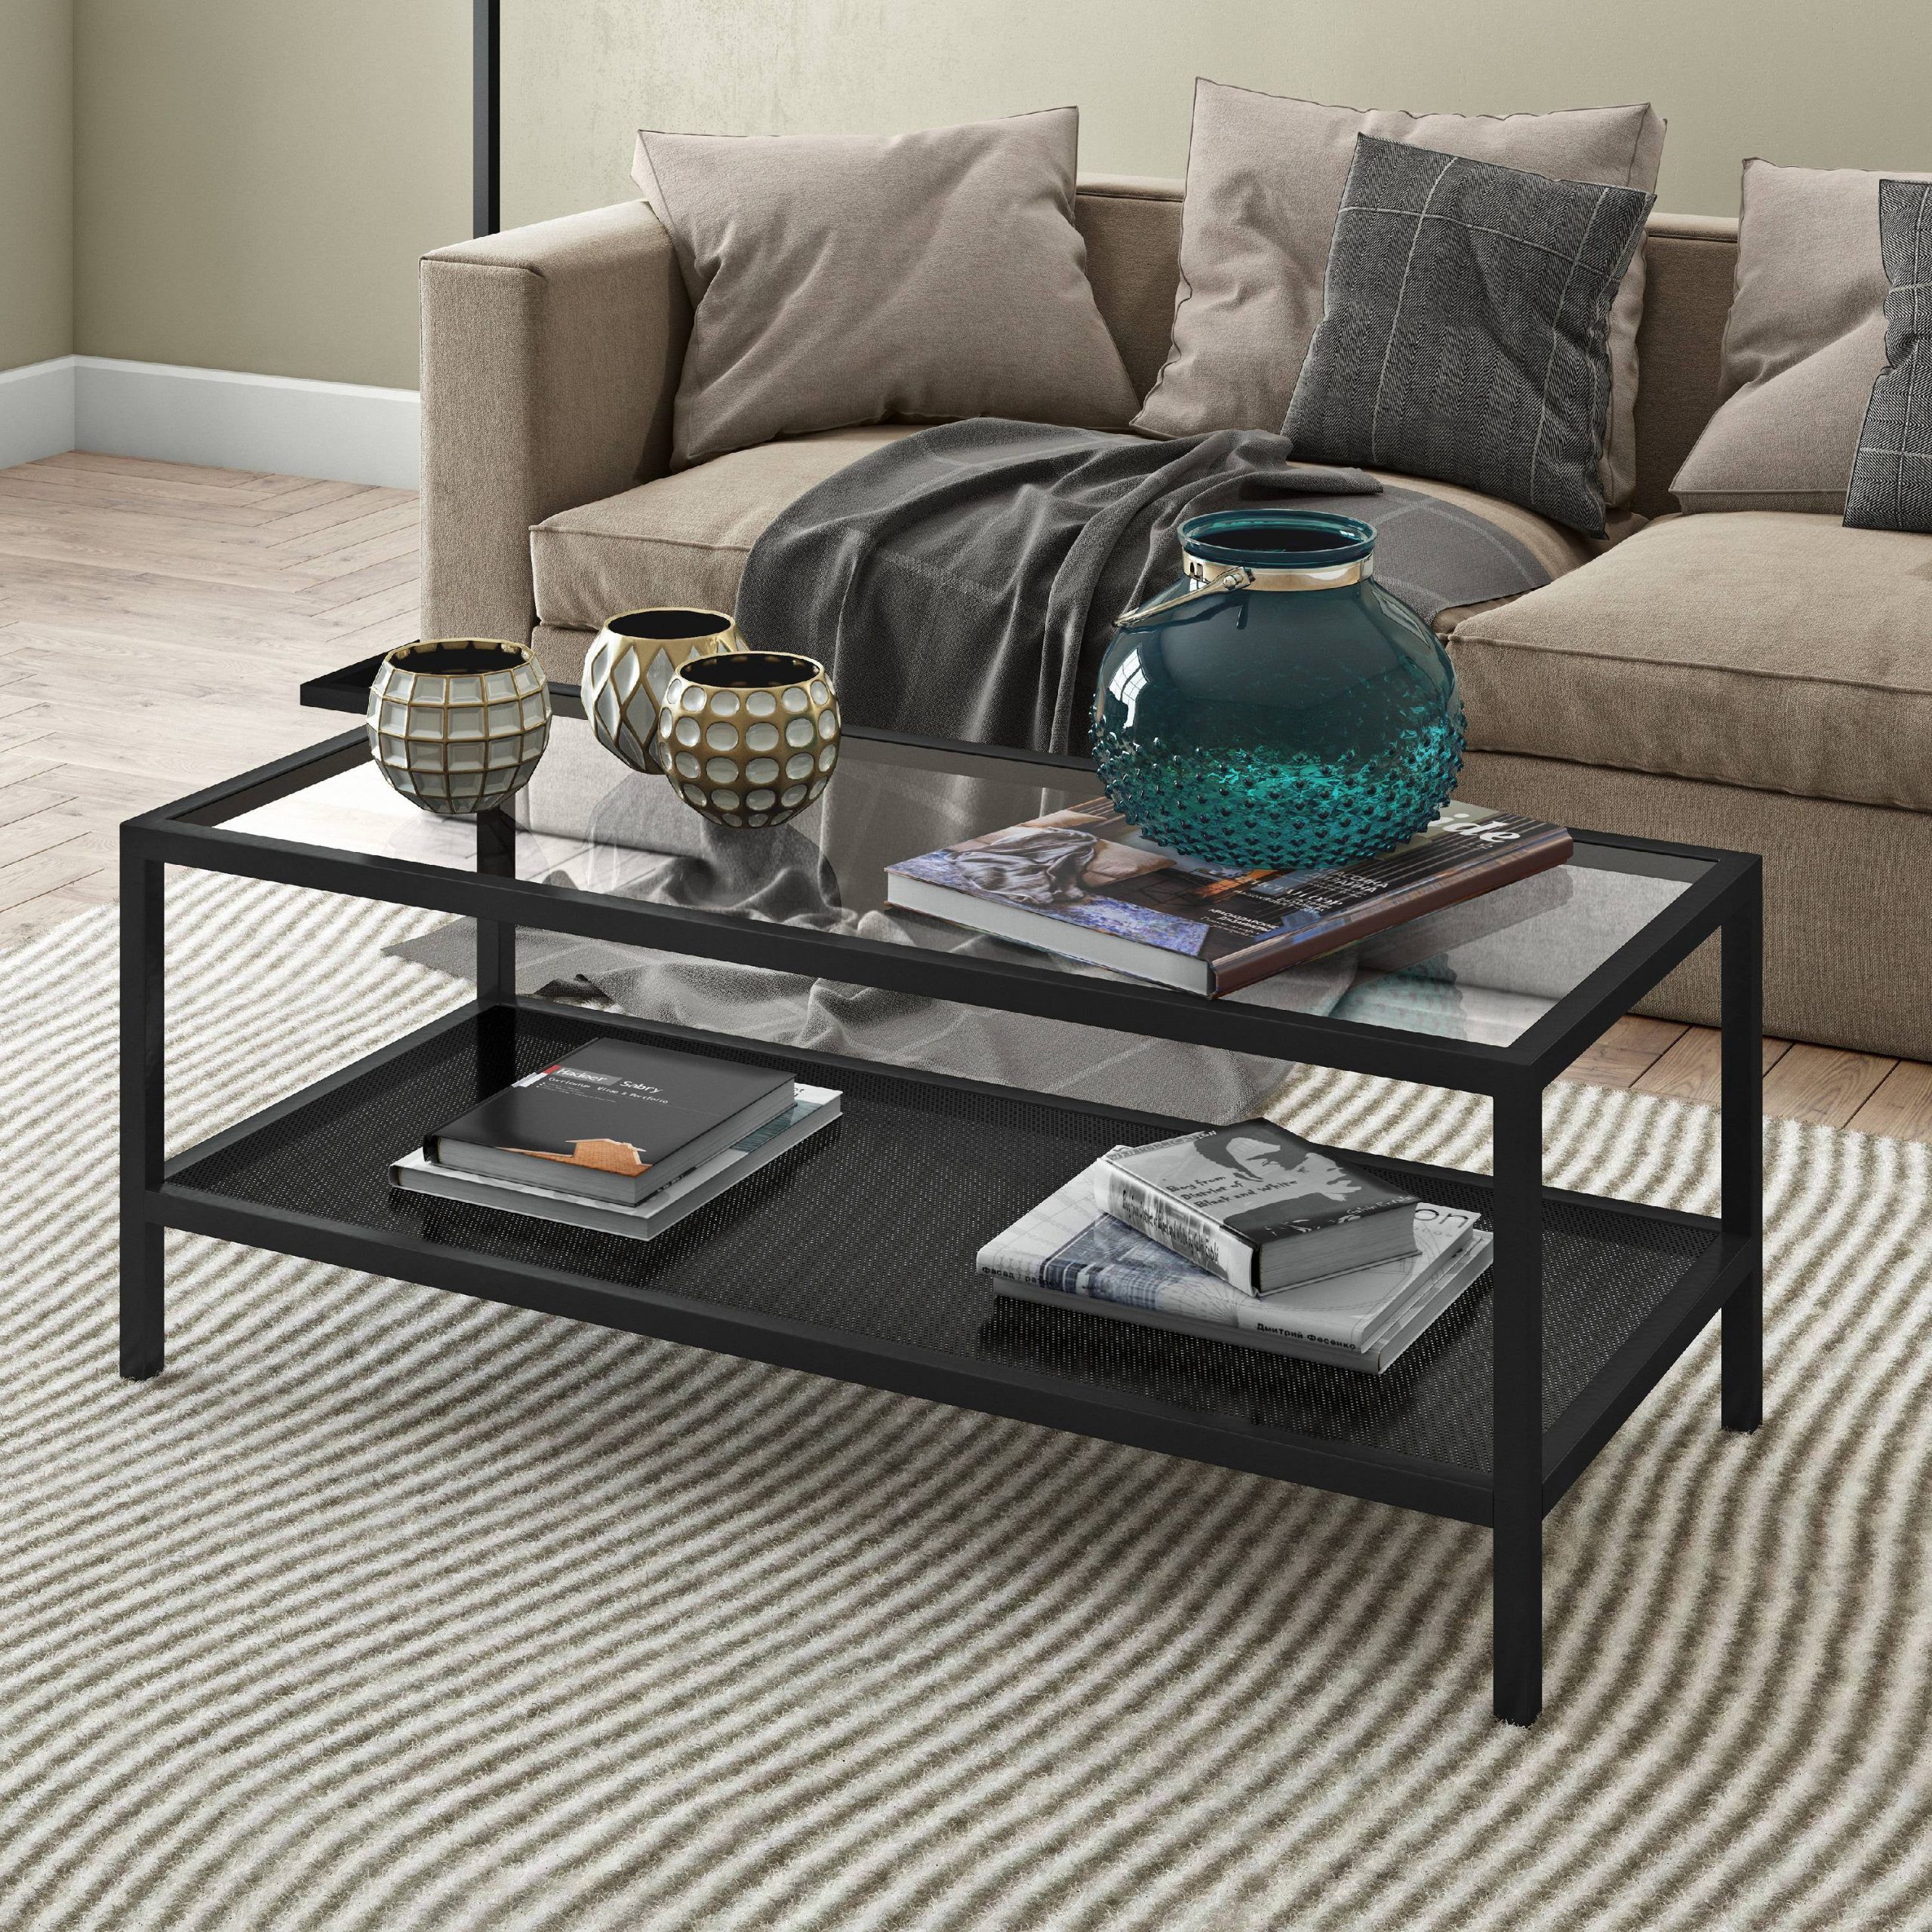 Evelyn&zoe Contemporary Metal Coffee Table With Glass Top – Walmart Intended For Studio 350 Black Metal Coffee Tables (Gallery 12 of 20)